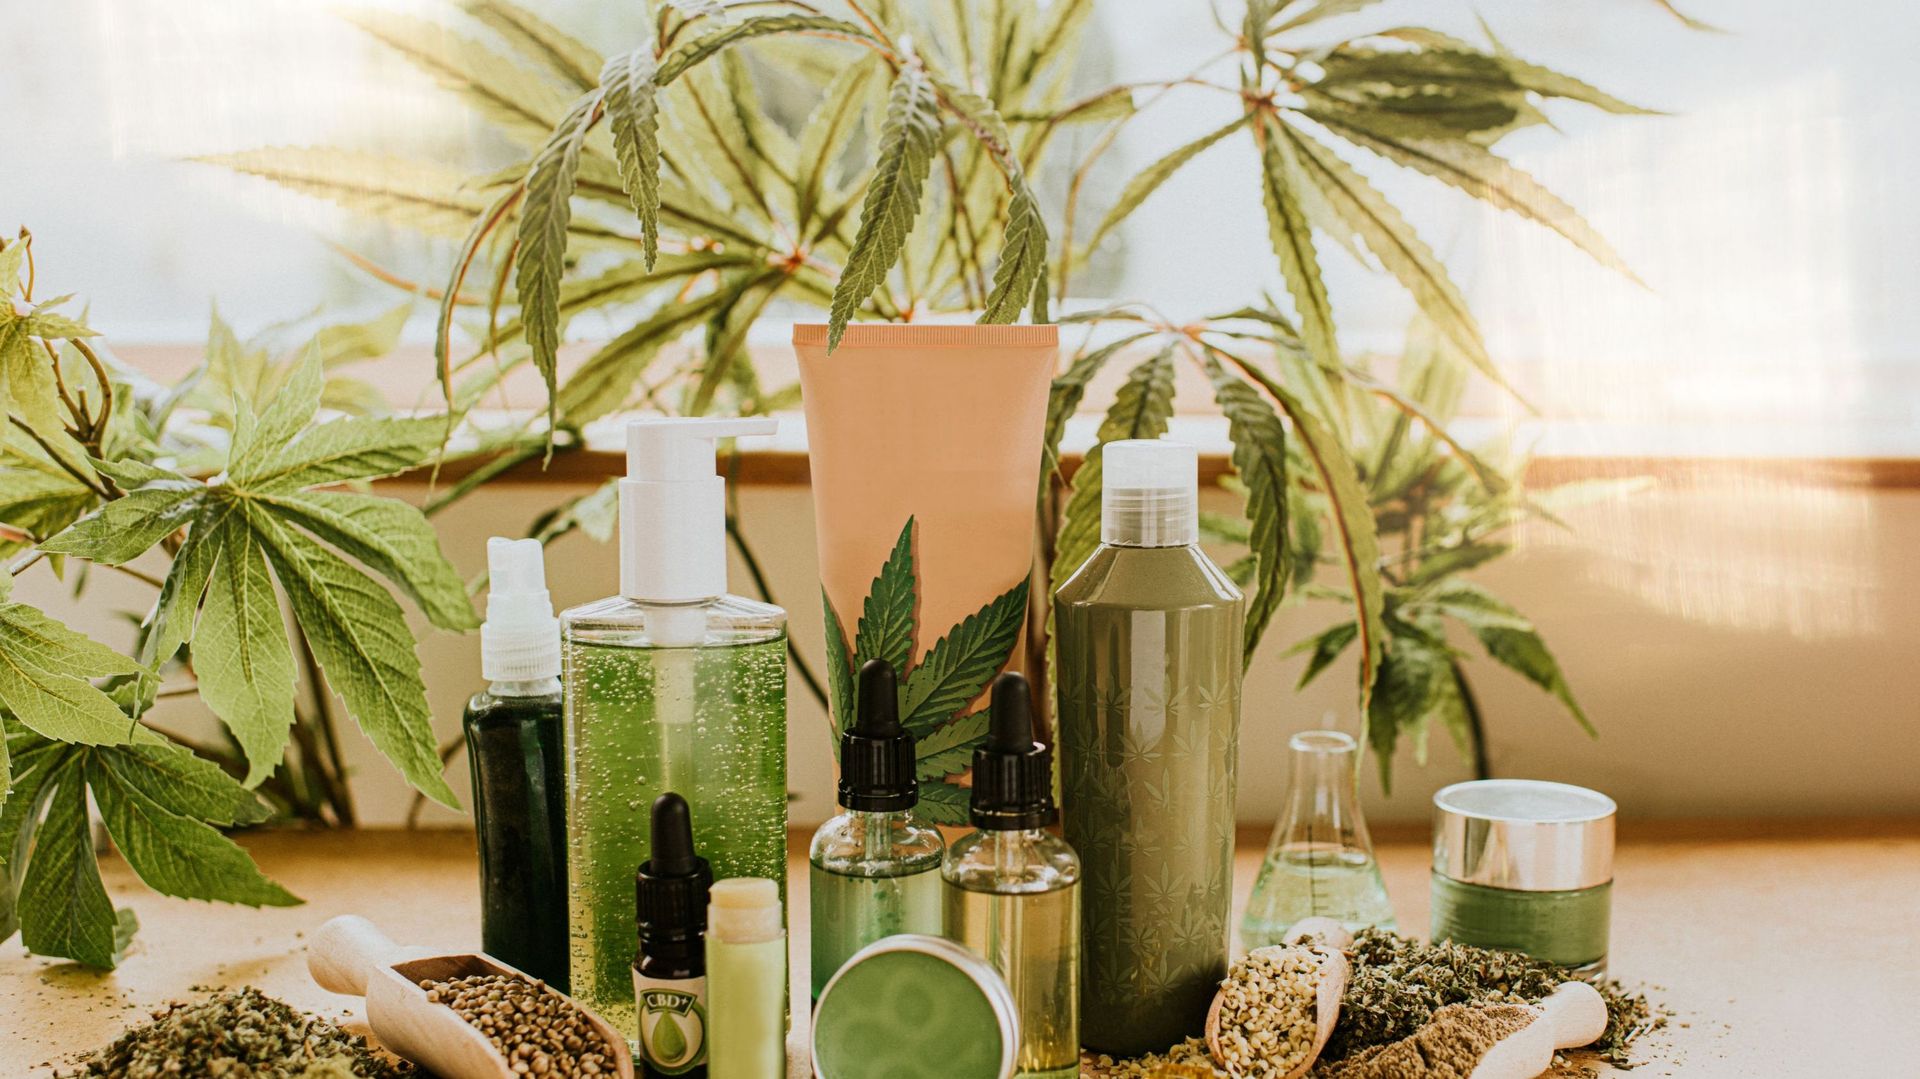 Still-Life Selection of CBD products, conveying vast possibilities of cannabis as an Ingredient in an Alternative therapies, Lifestyle and treatments.